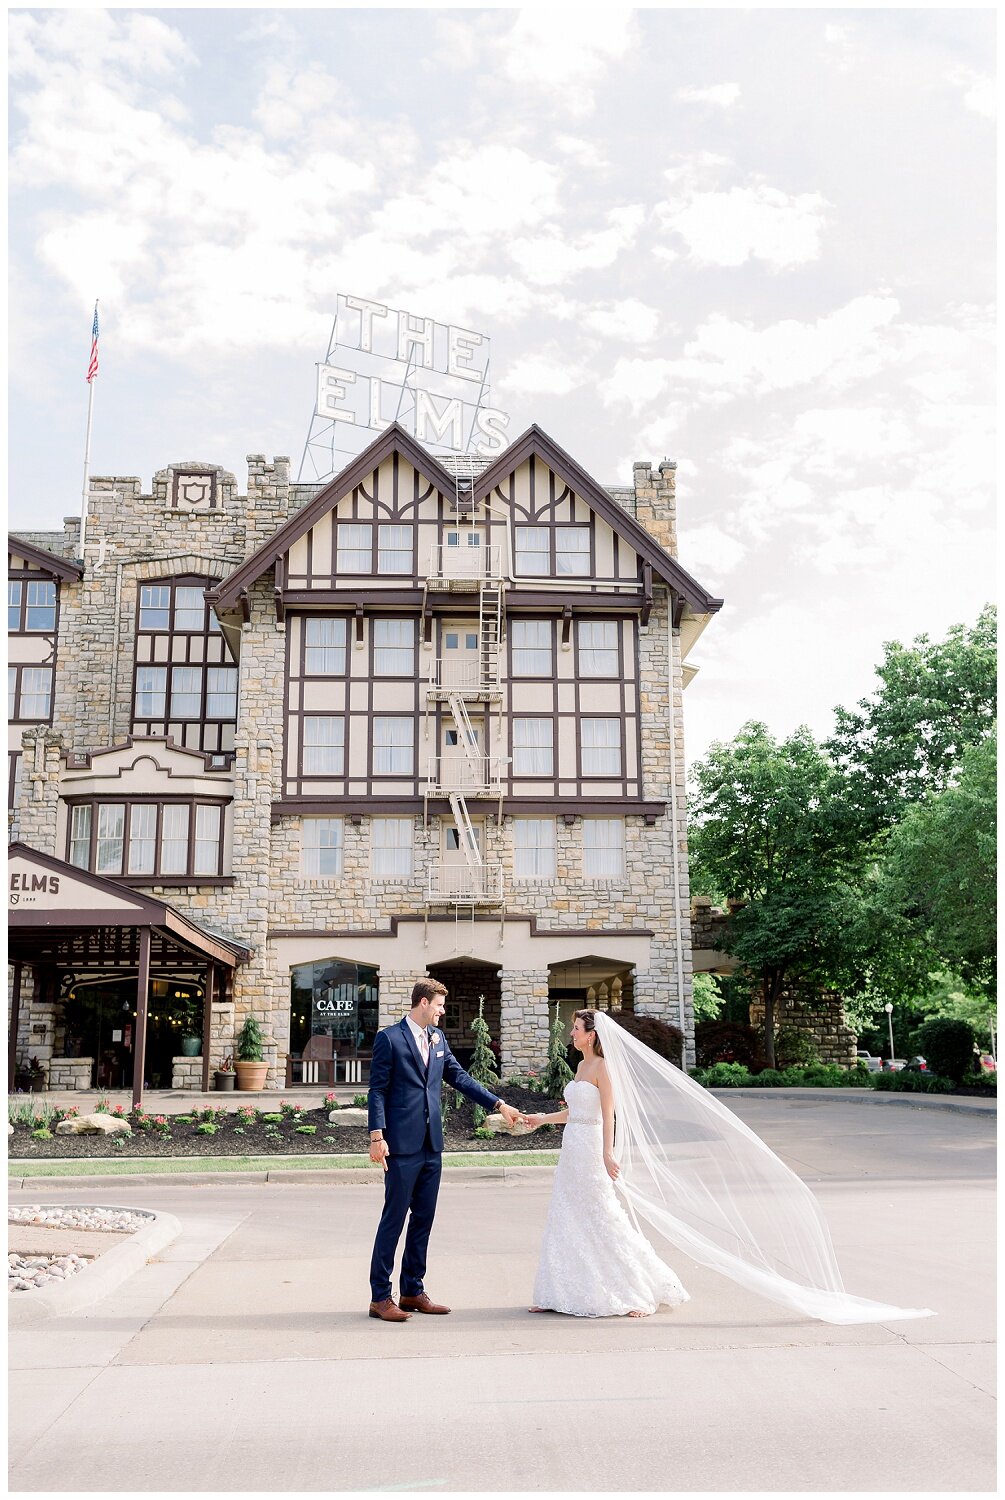 The Elms Hotel and Spa wedding